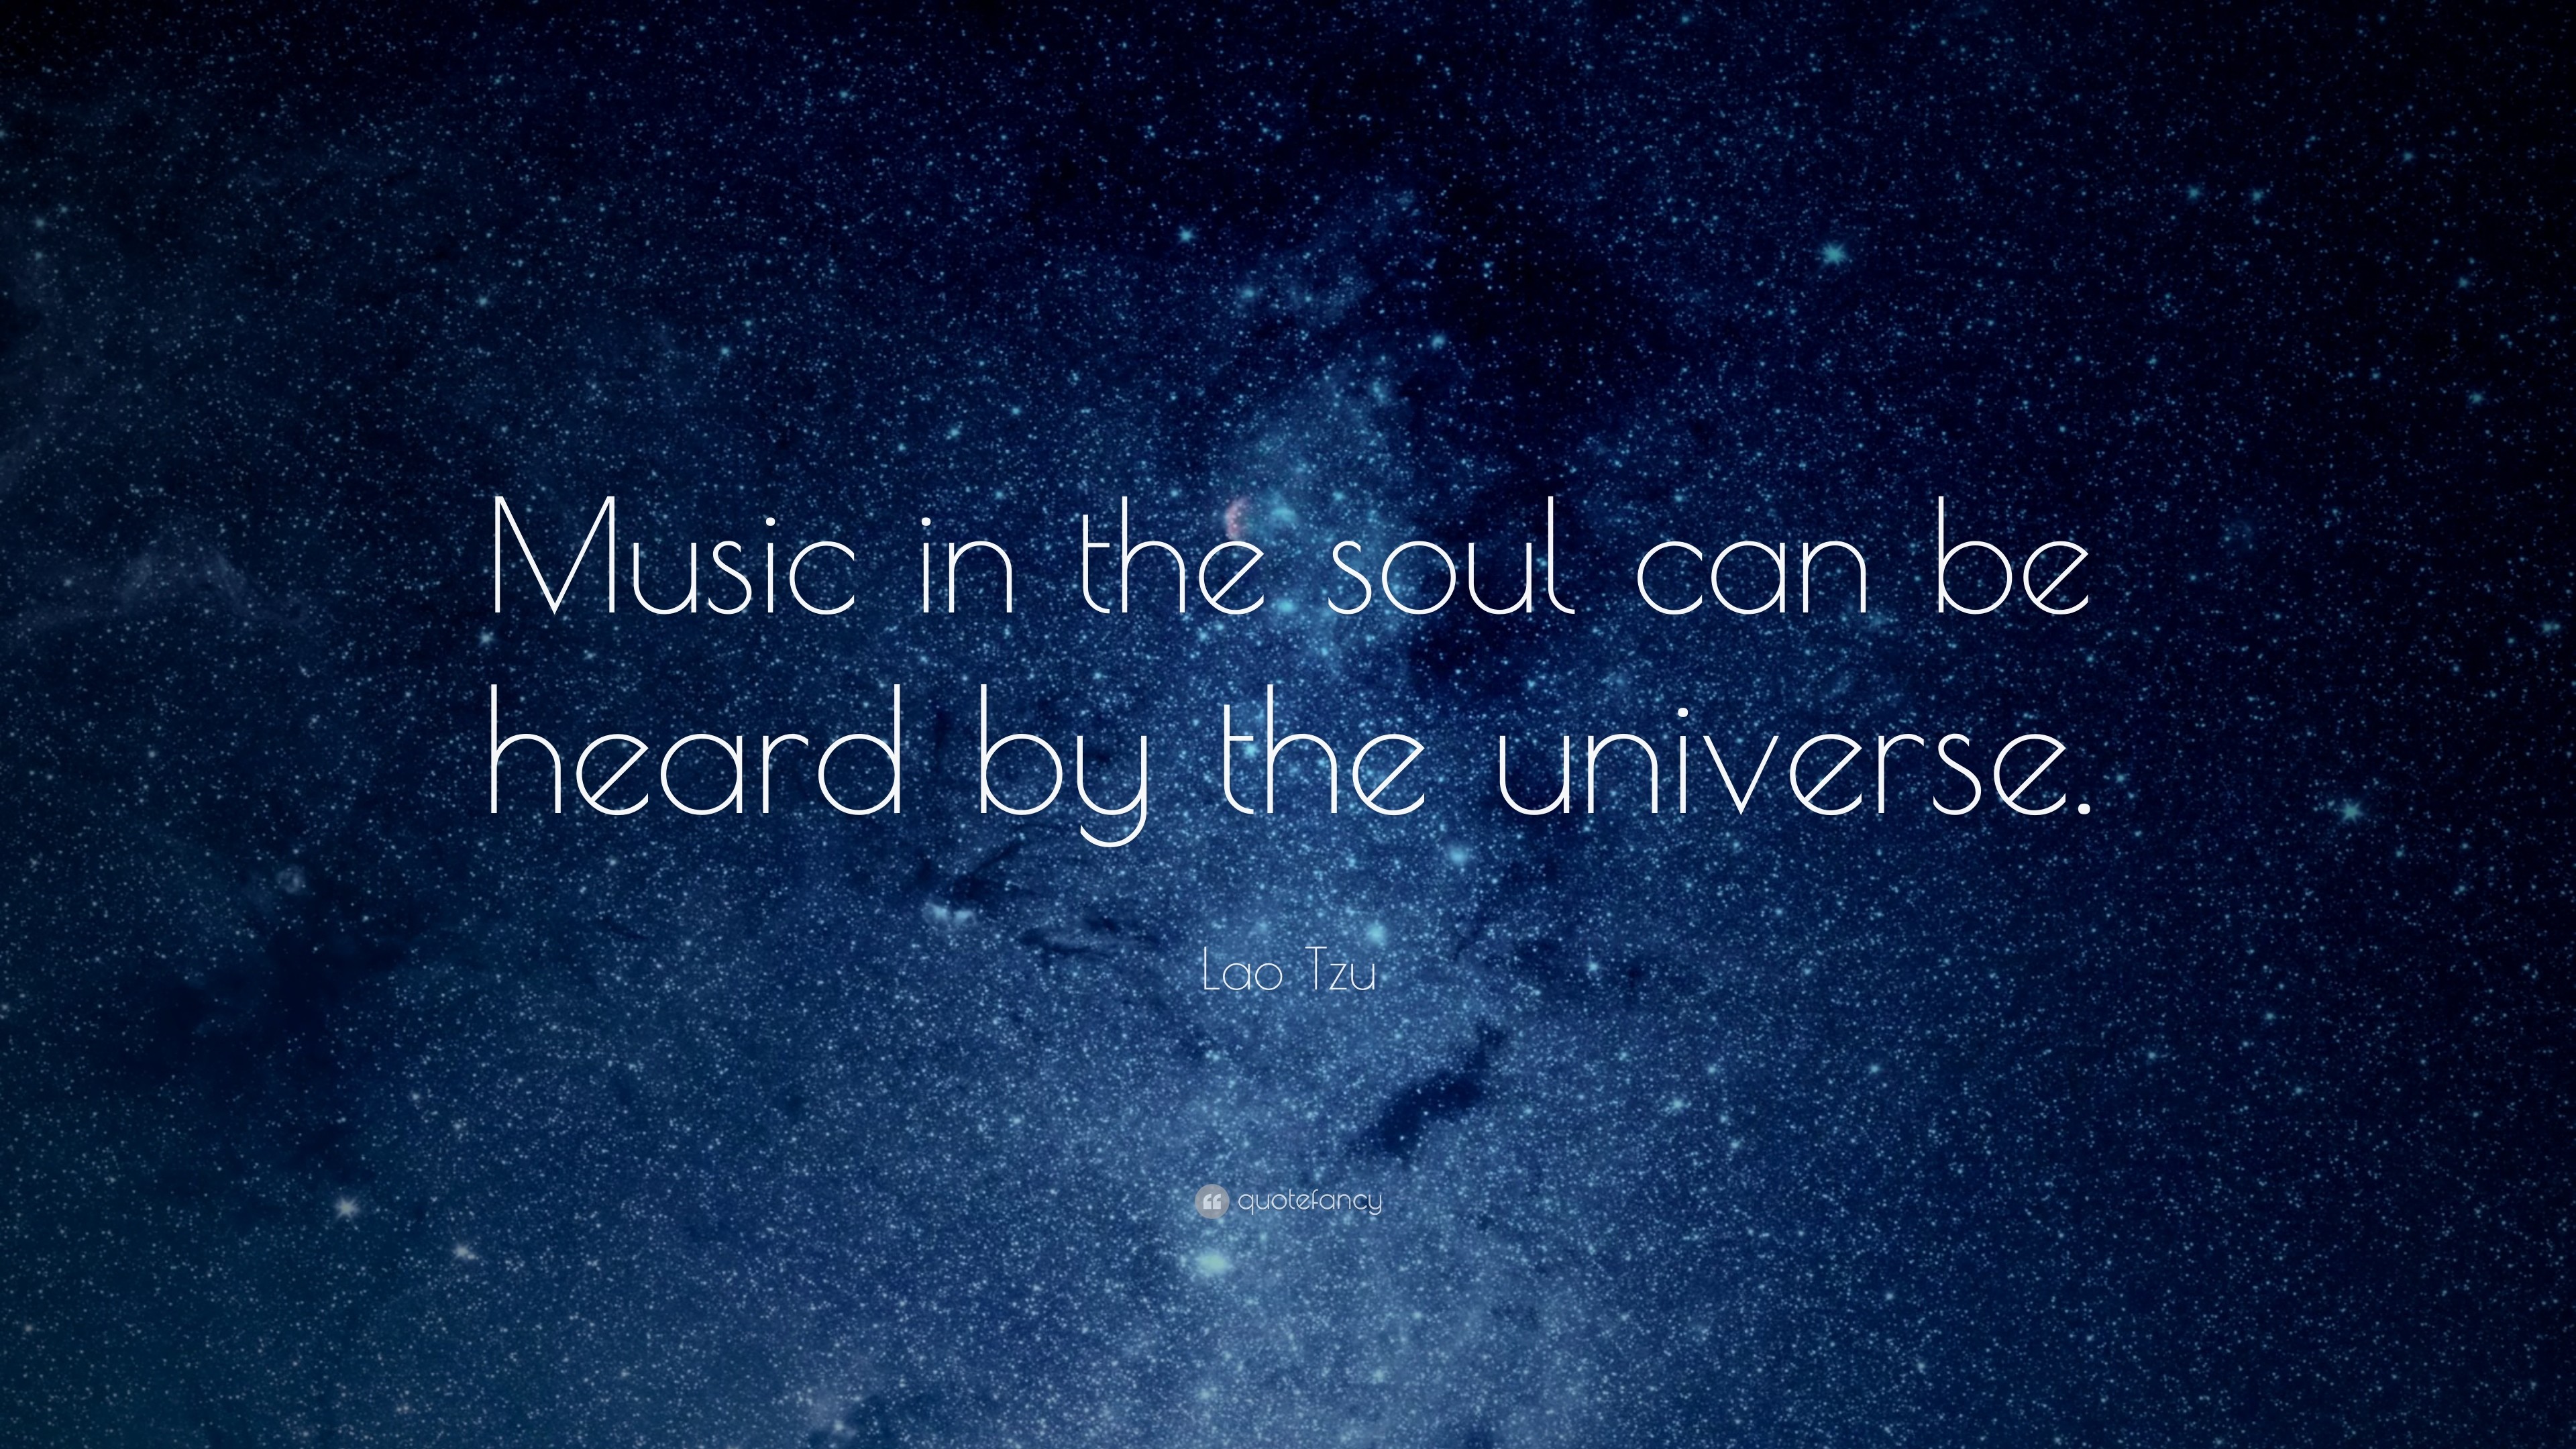 3840x2160 Music Quotes: “Music in the soul can be heard by the universe.”